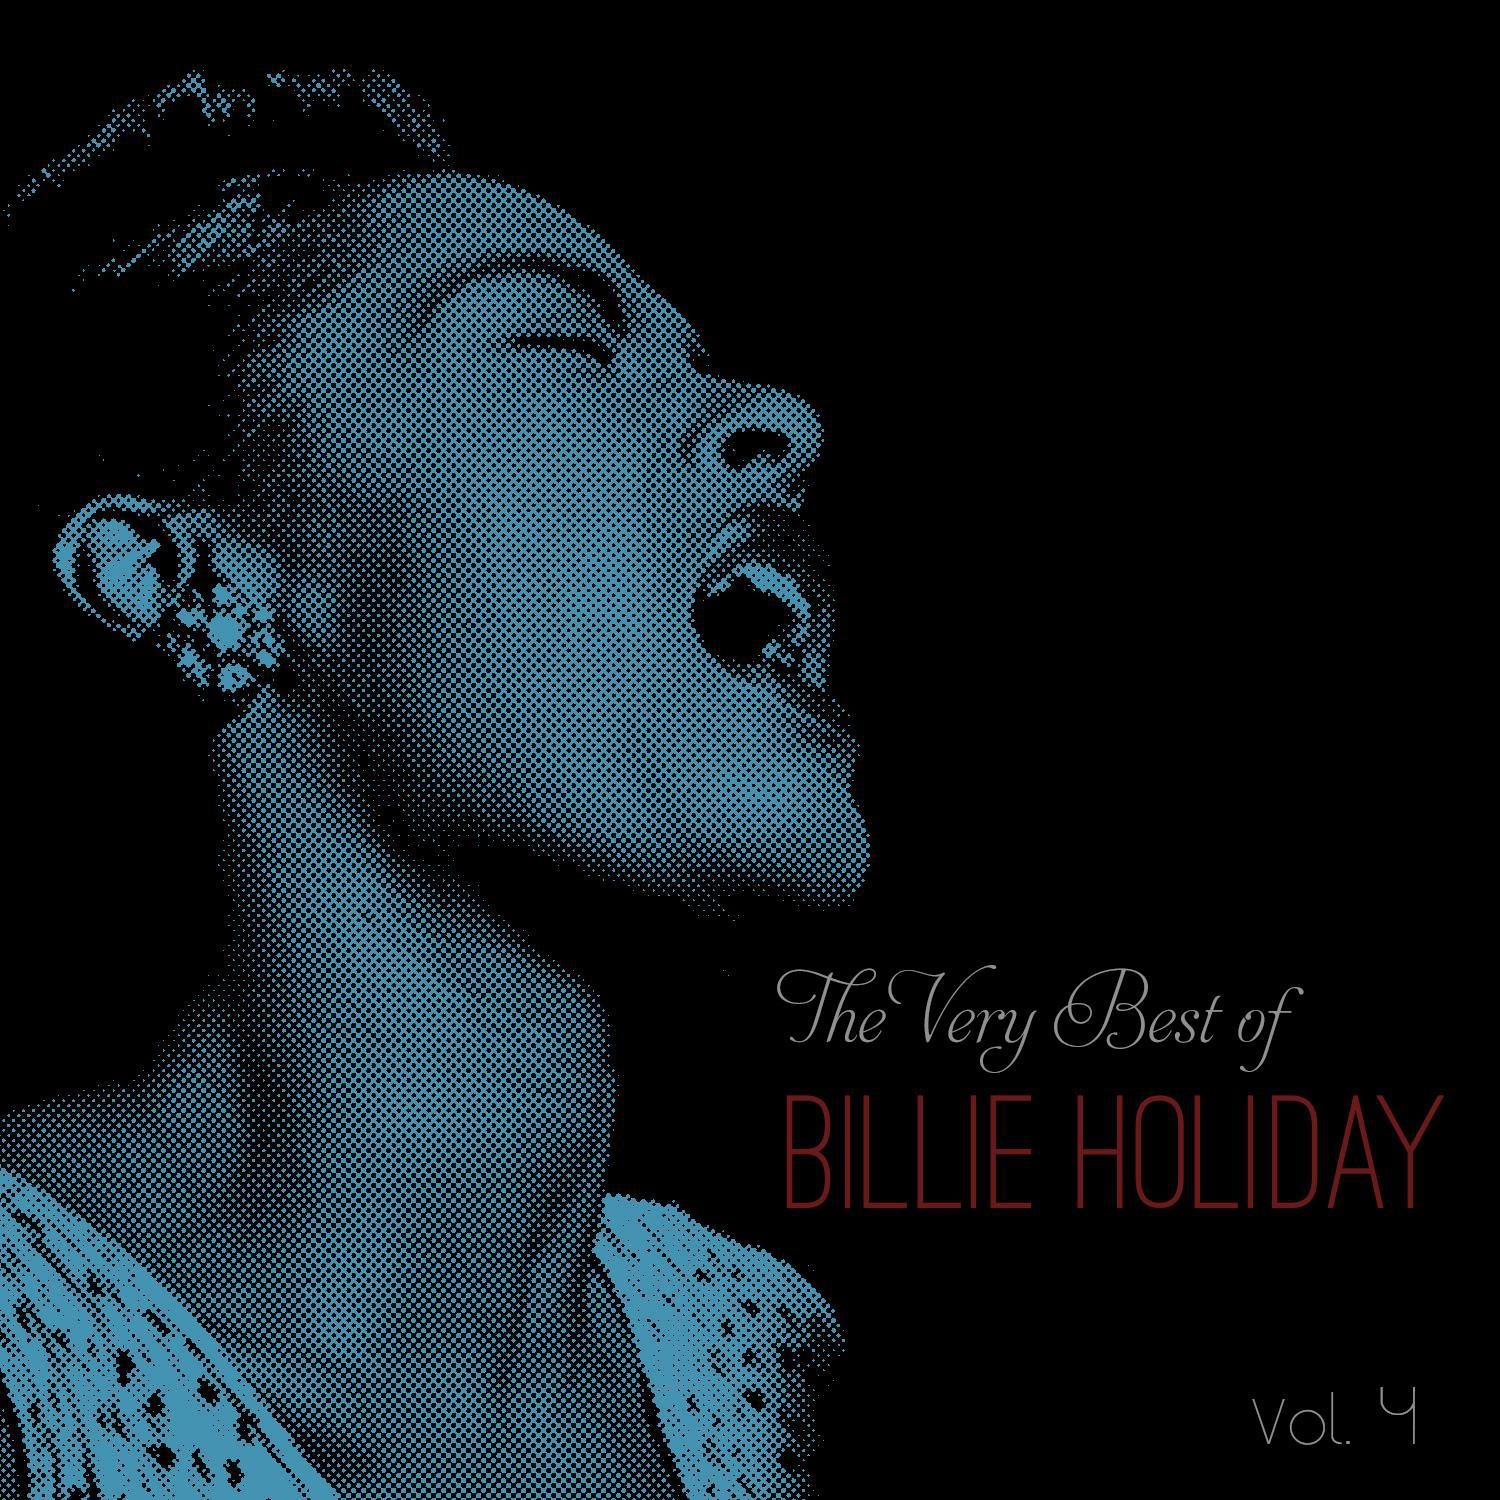 The Very Best of Billie Holiday, Vol. 4